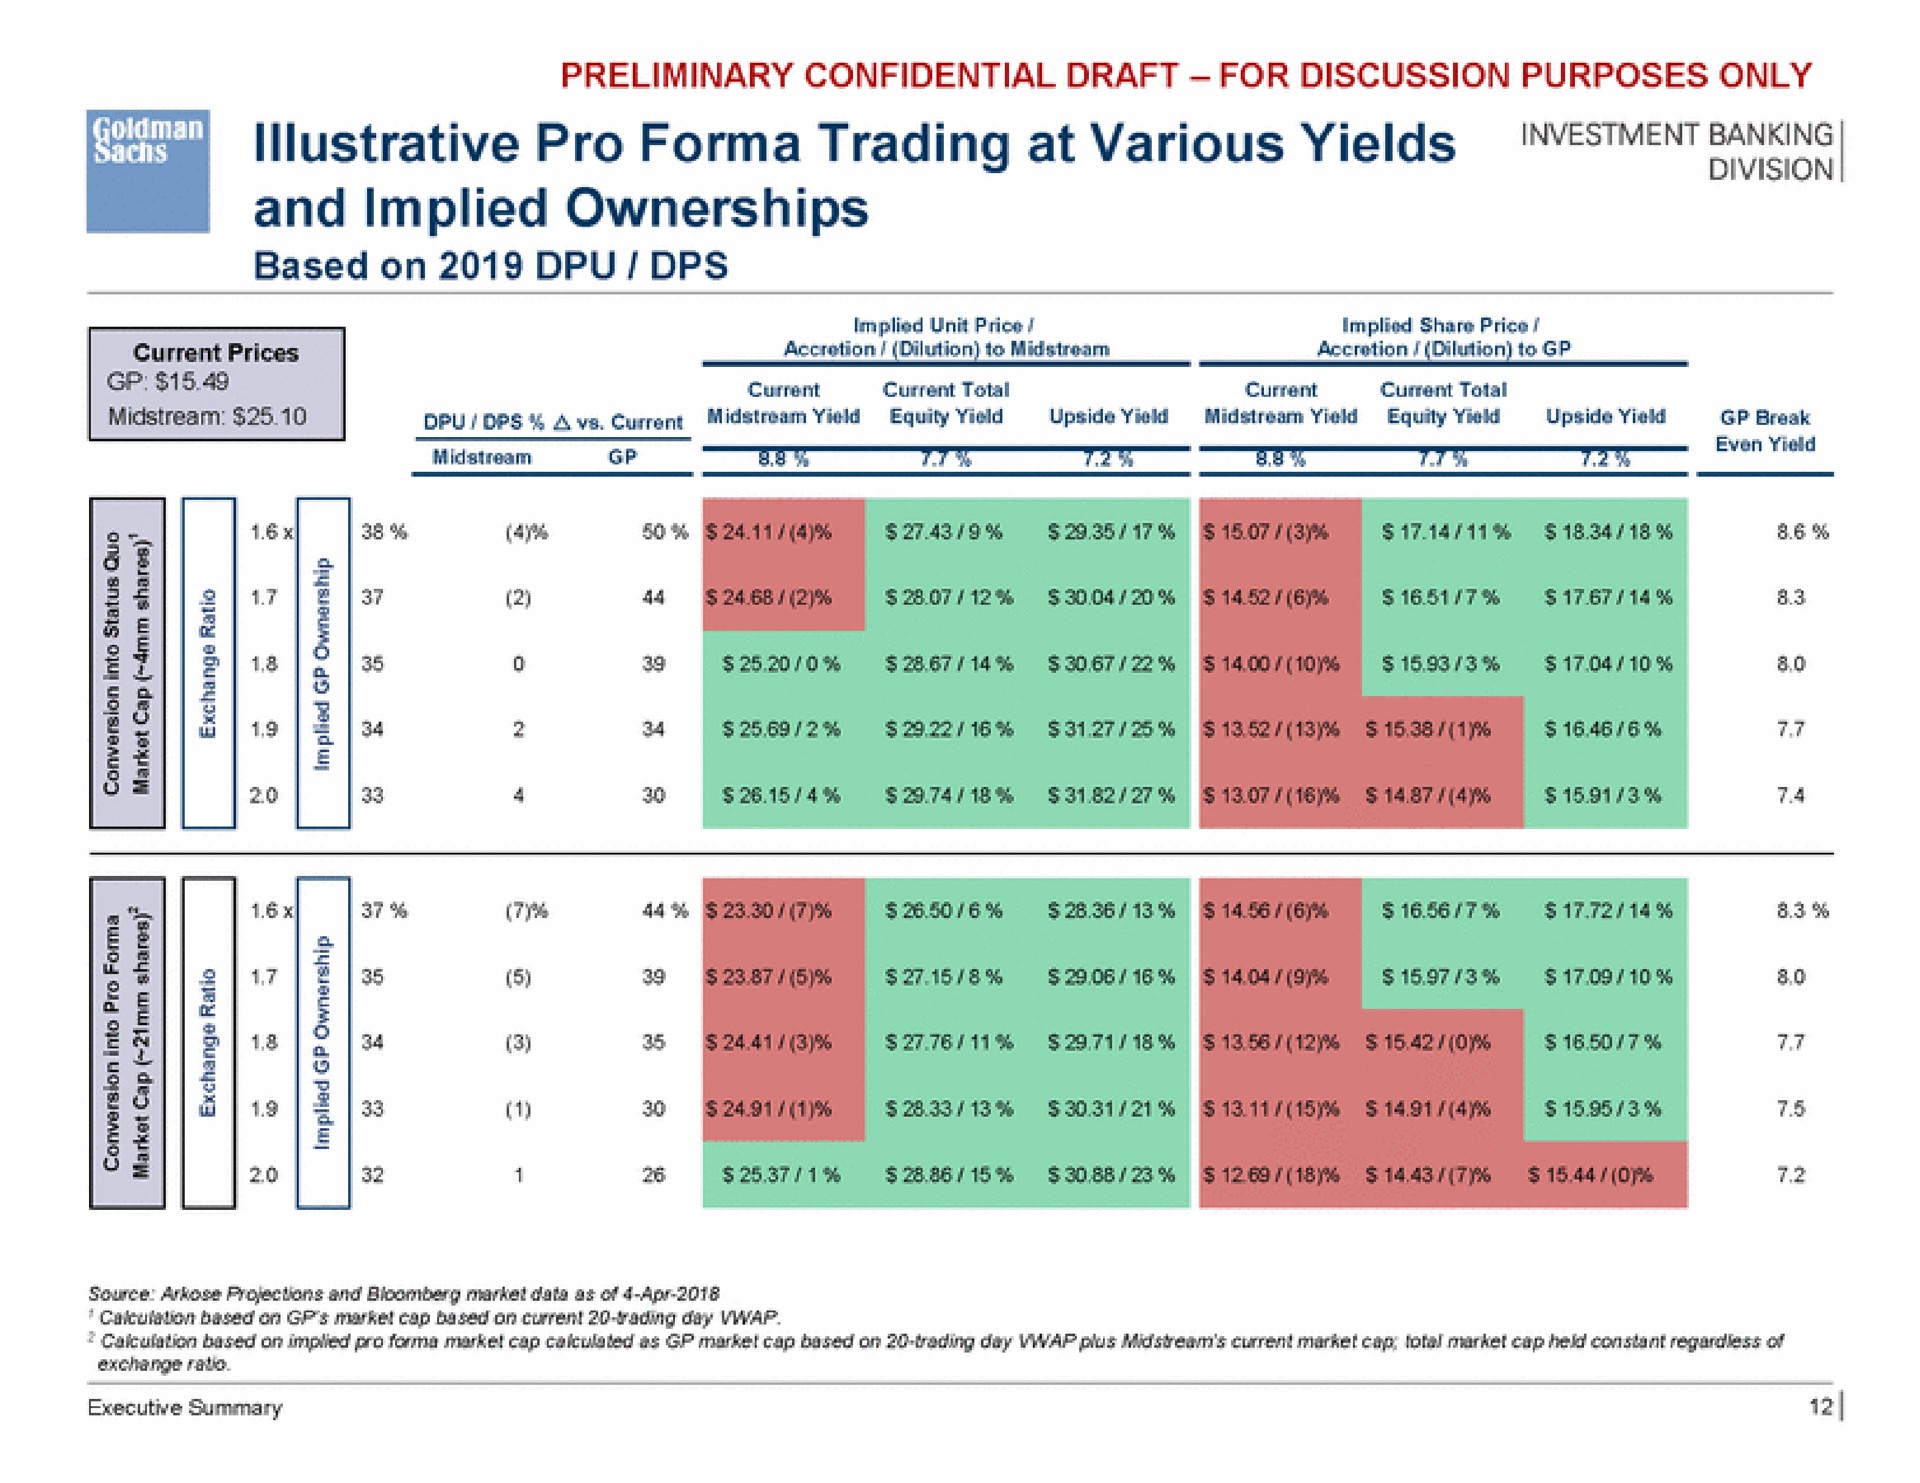 illustrative pro trading at various yields and implied ownerships | Goldman Sachs